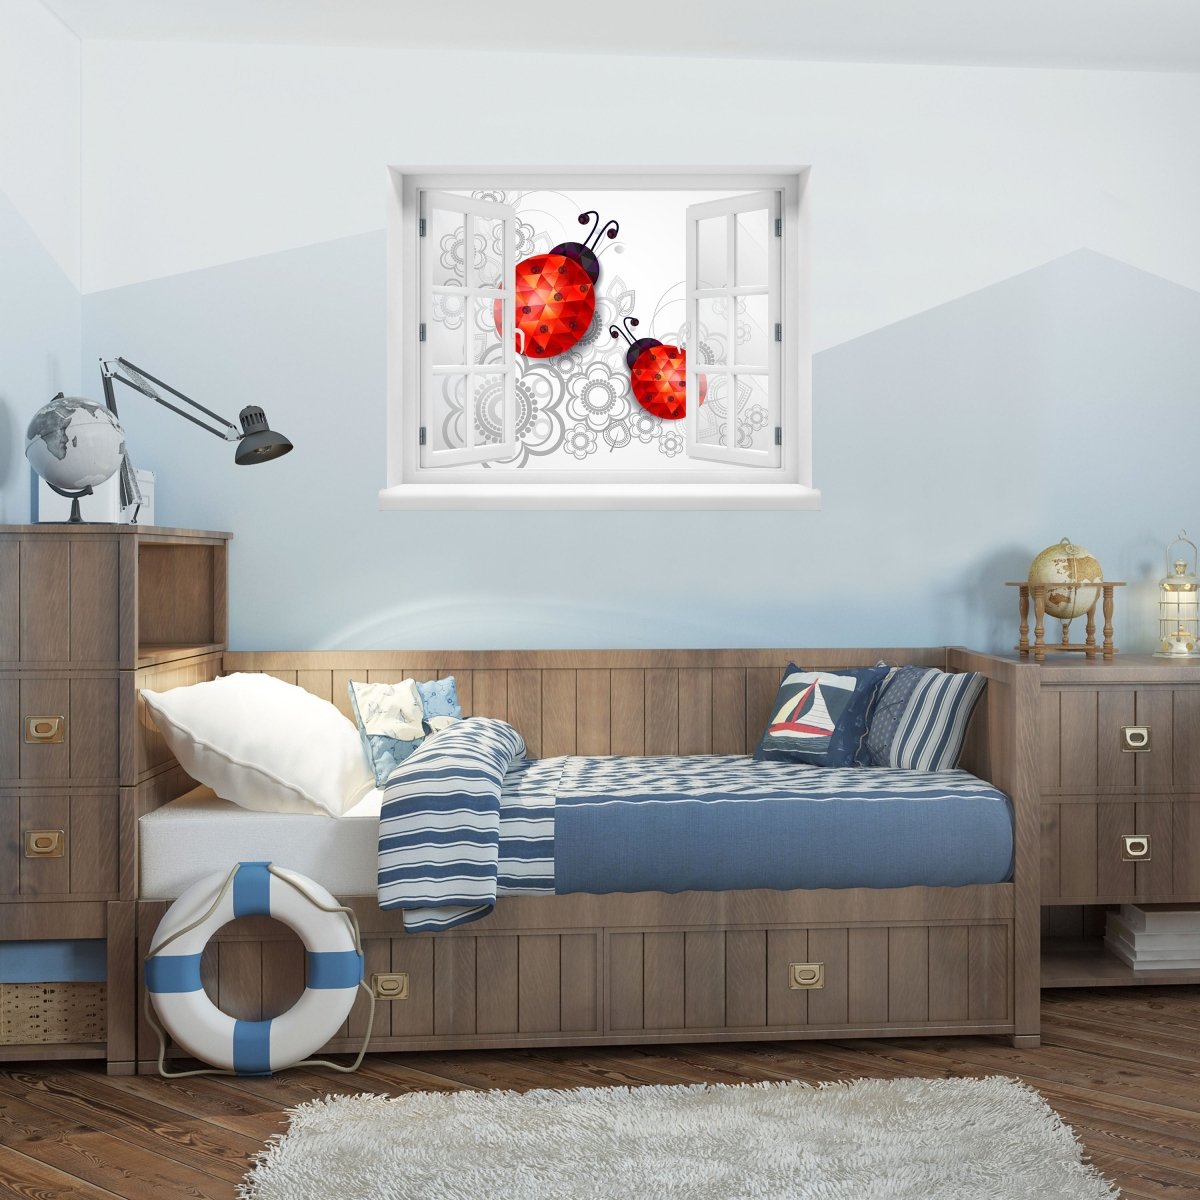 3D wall sticker ladybug patterns, ornaments, shapes - Wall Decal M1191